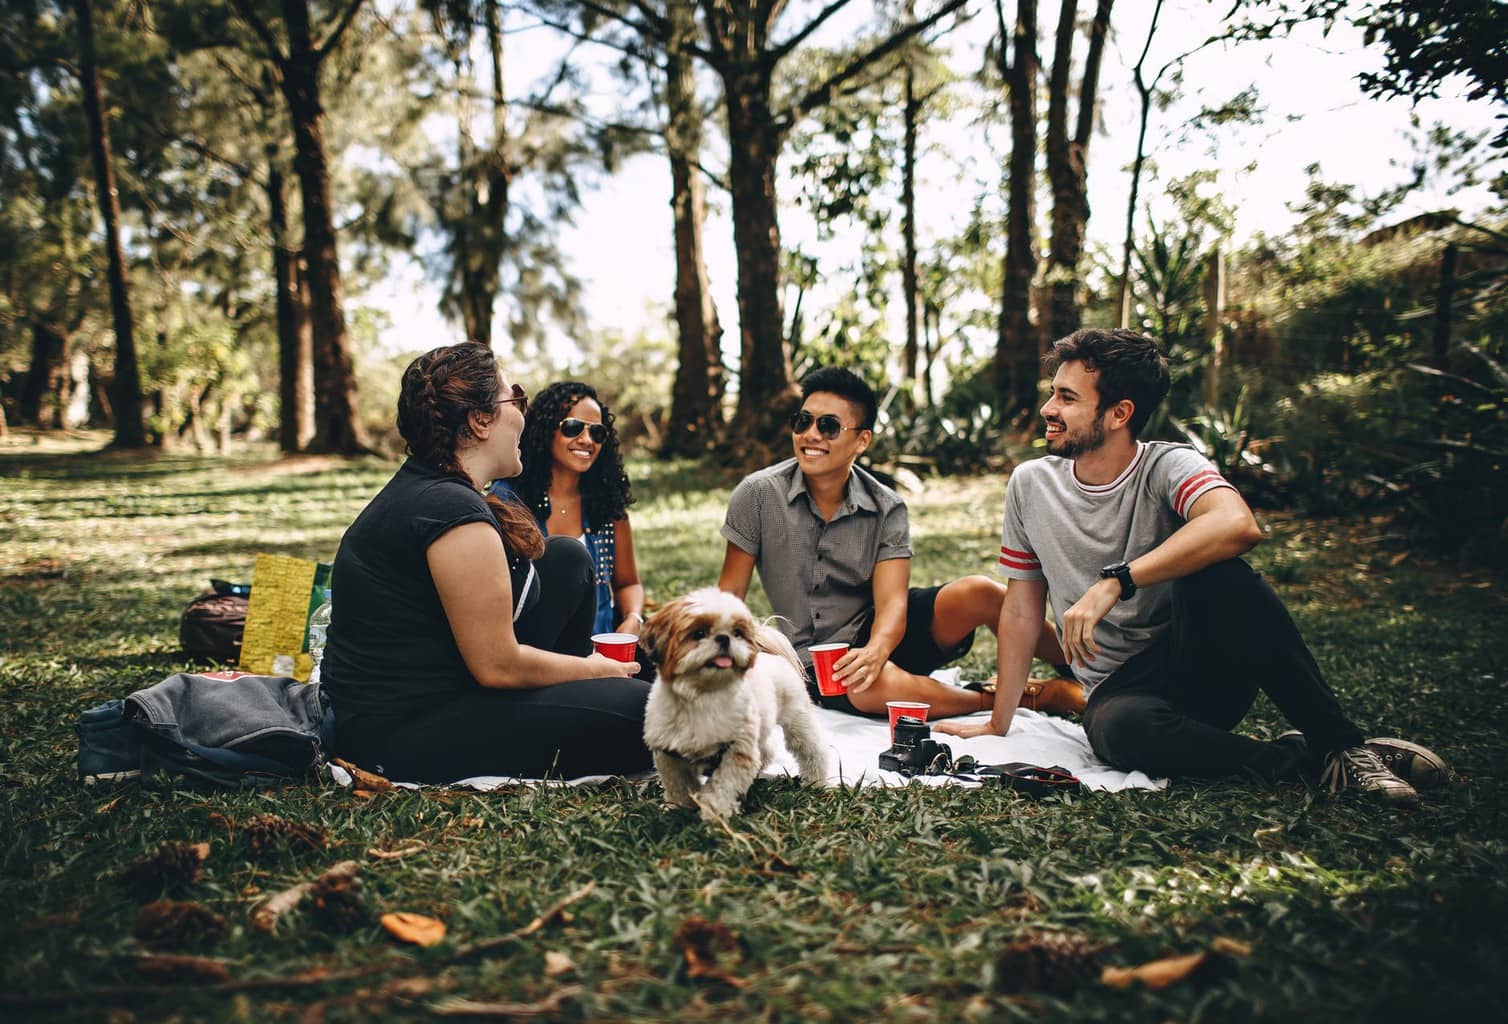 Four friends in the park with a dog eating a picnic